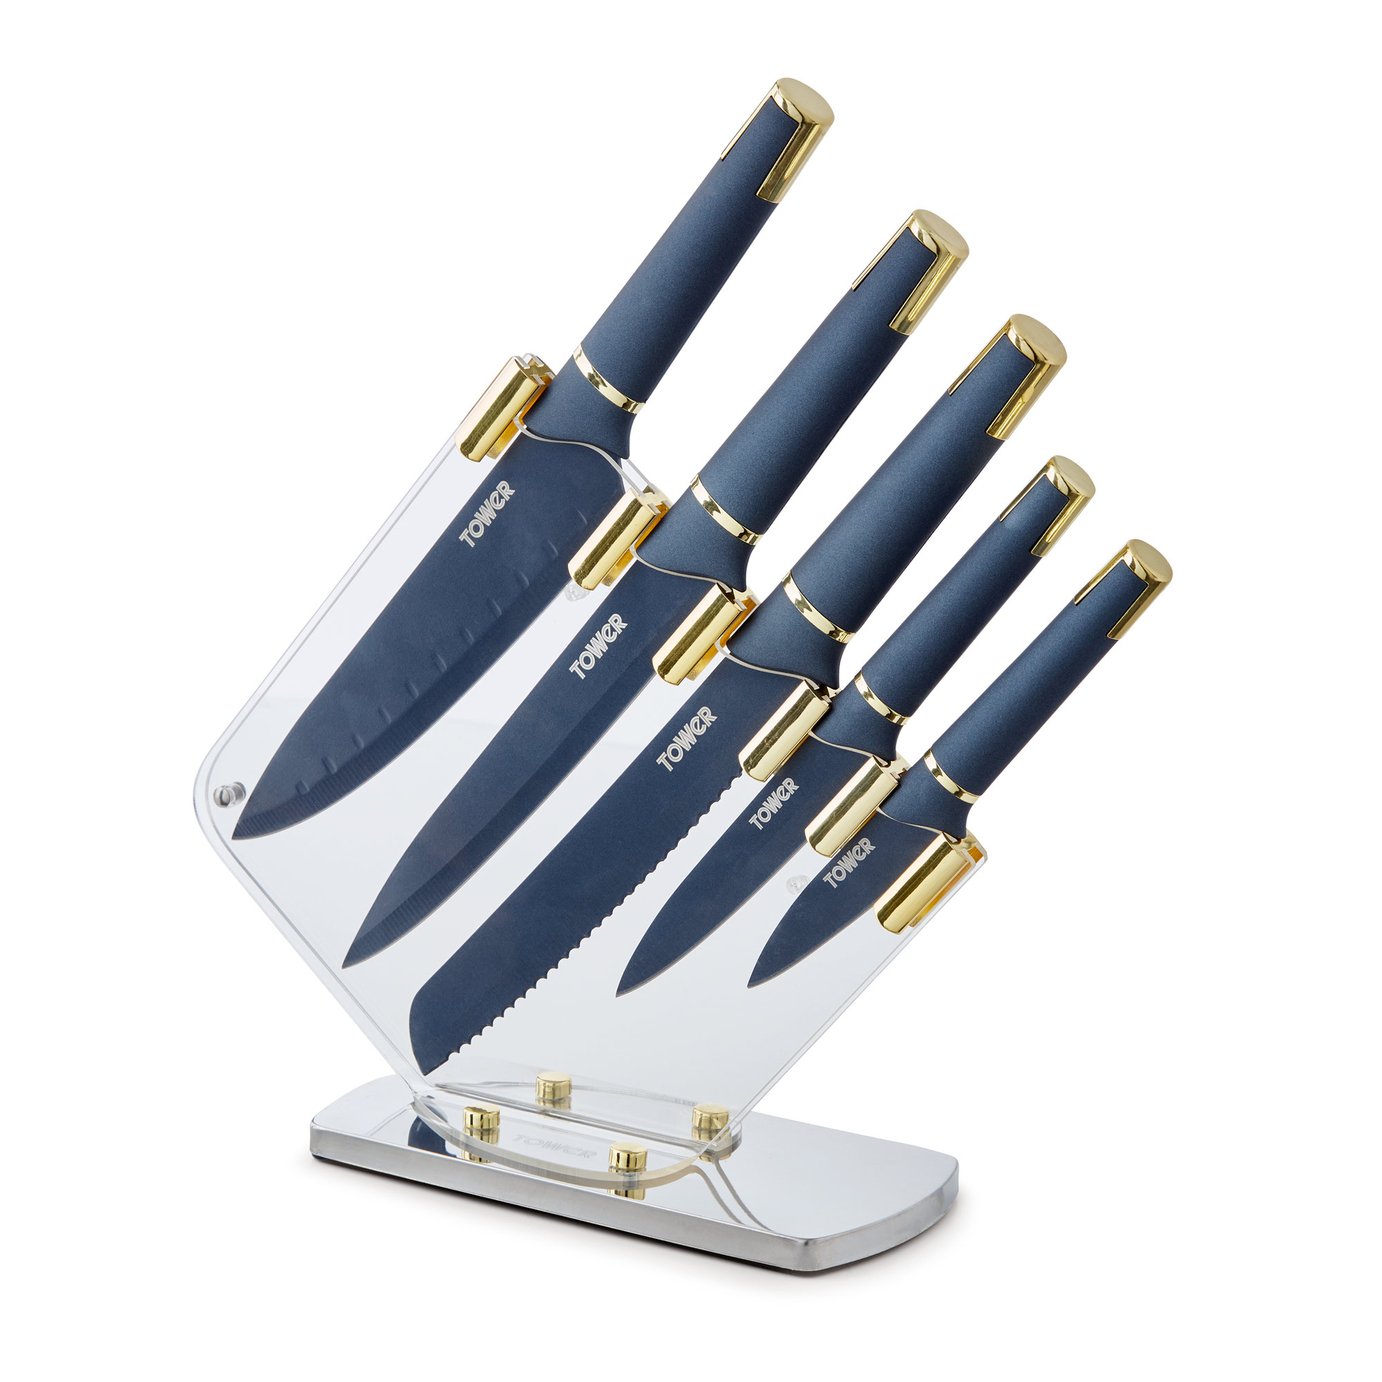 Tower 5 Piece Stainless Steel Knife Set - Blue and Gold